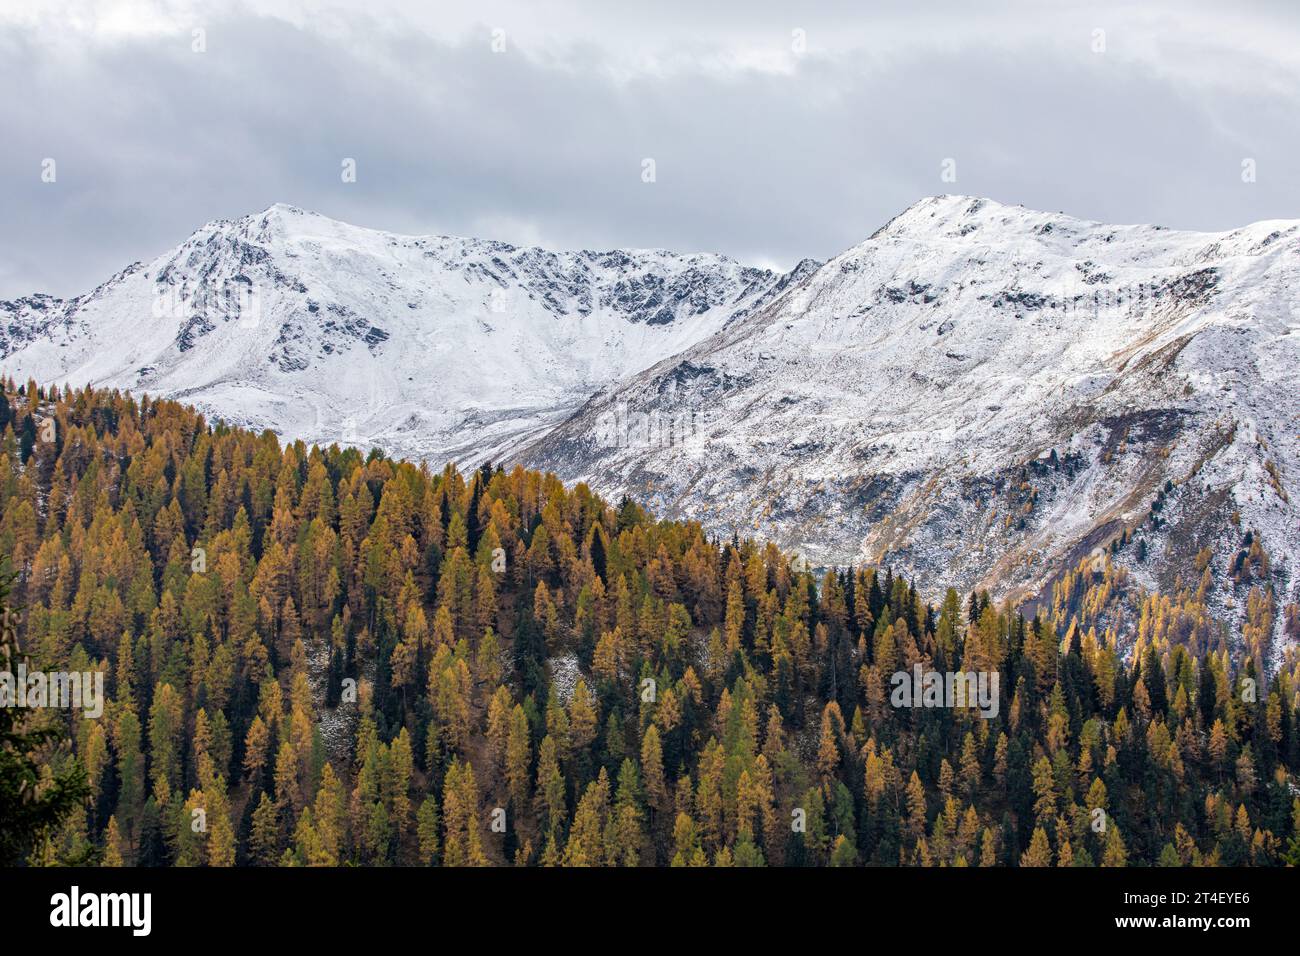 Scenic autumn view with snow covered mountains and golden larch trees, near Davos, Switzerland Stock Photo